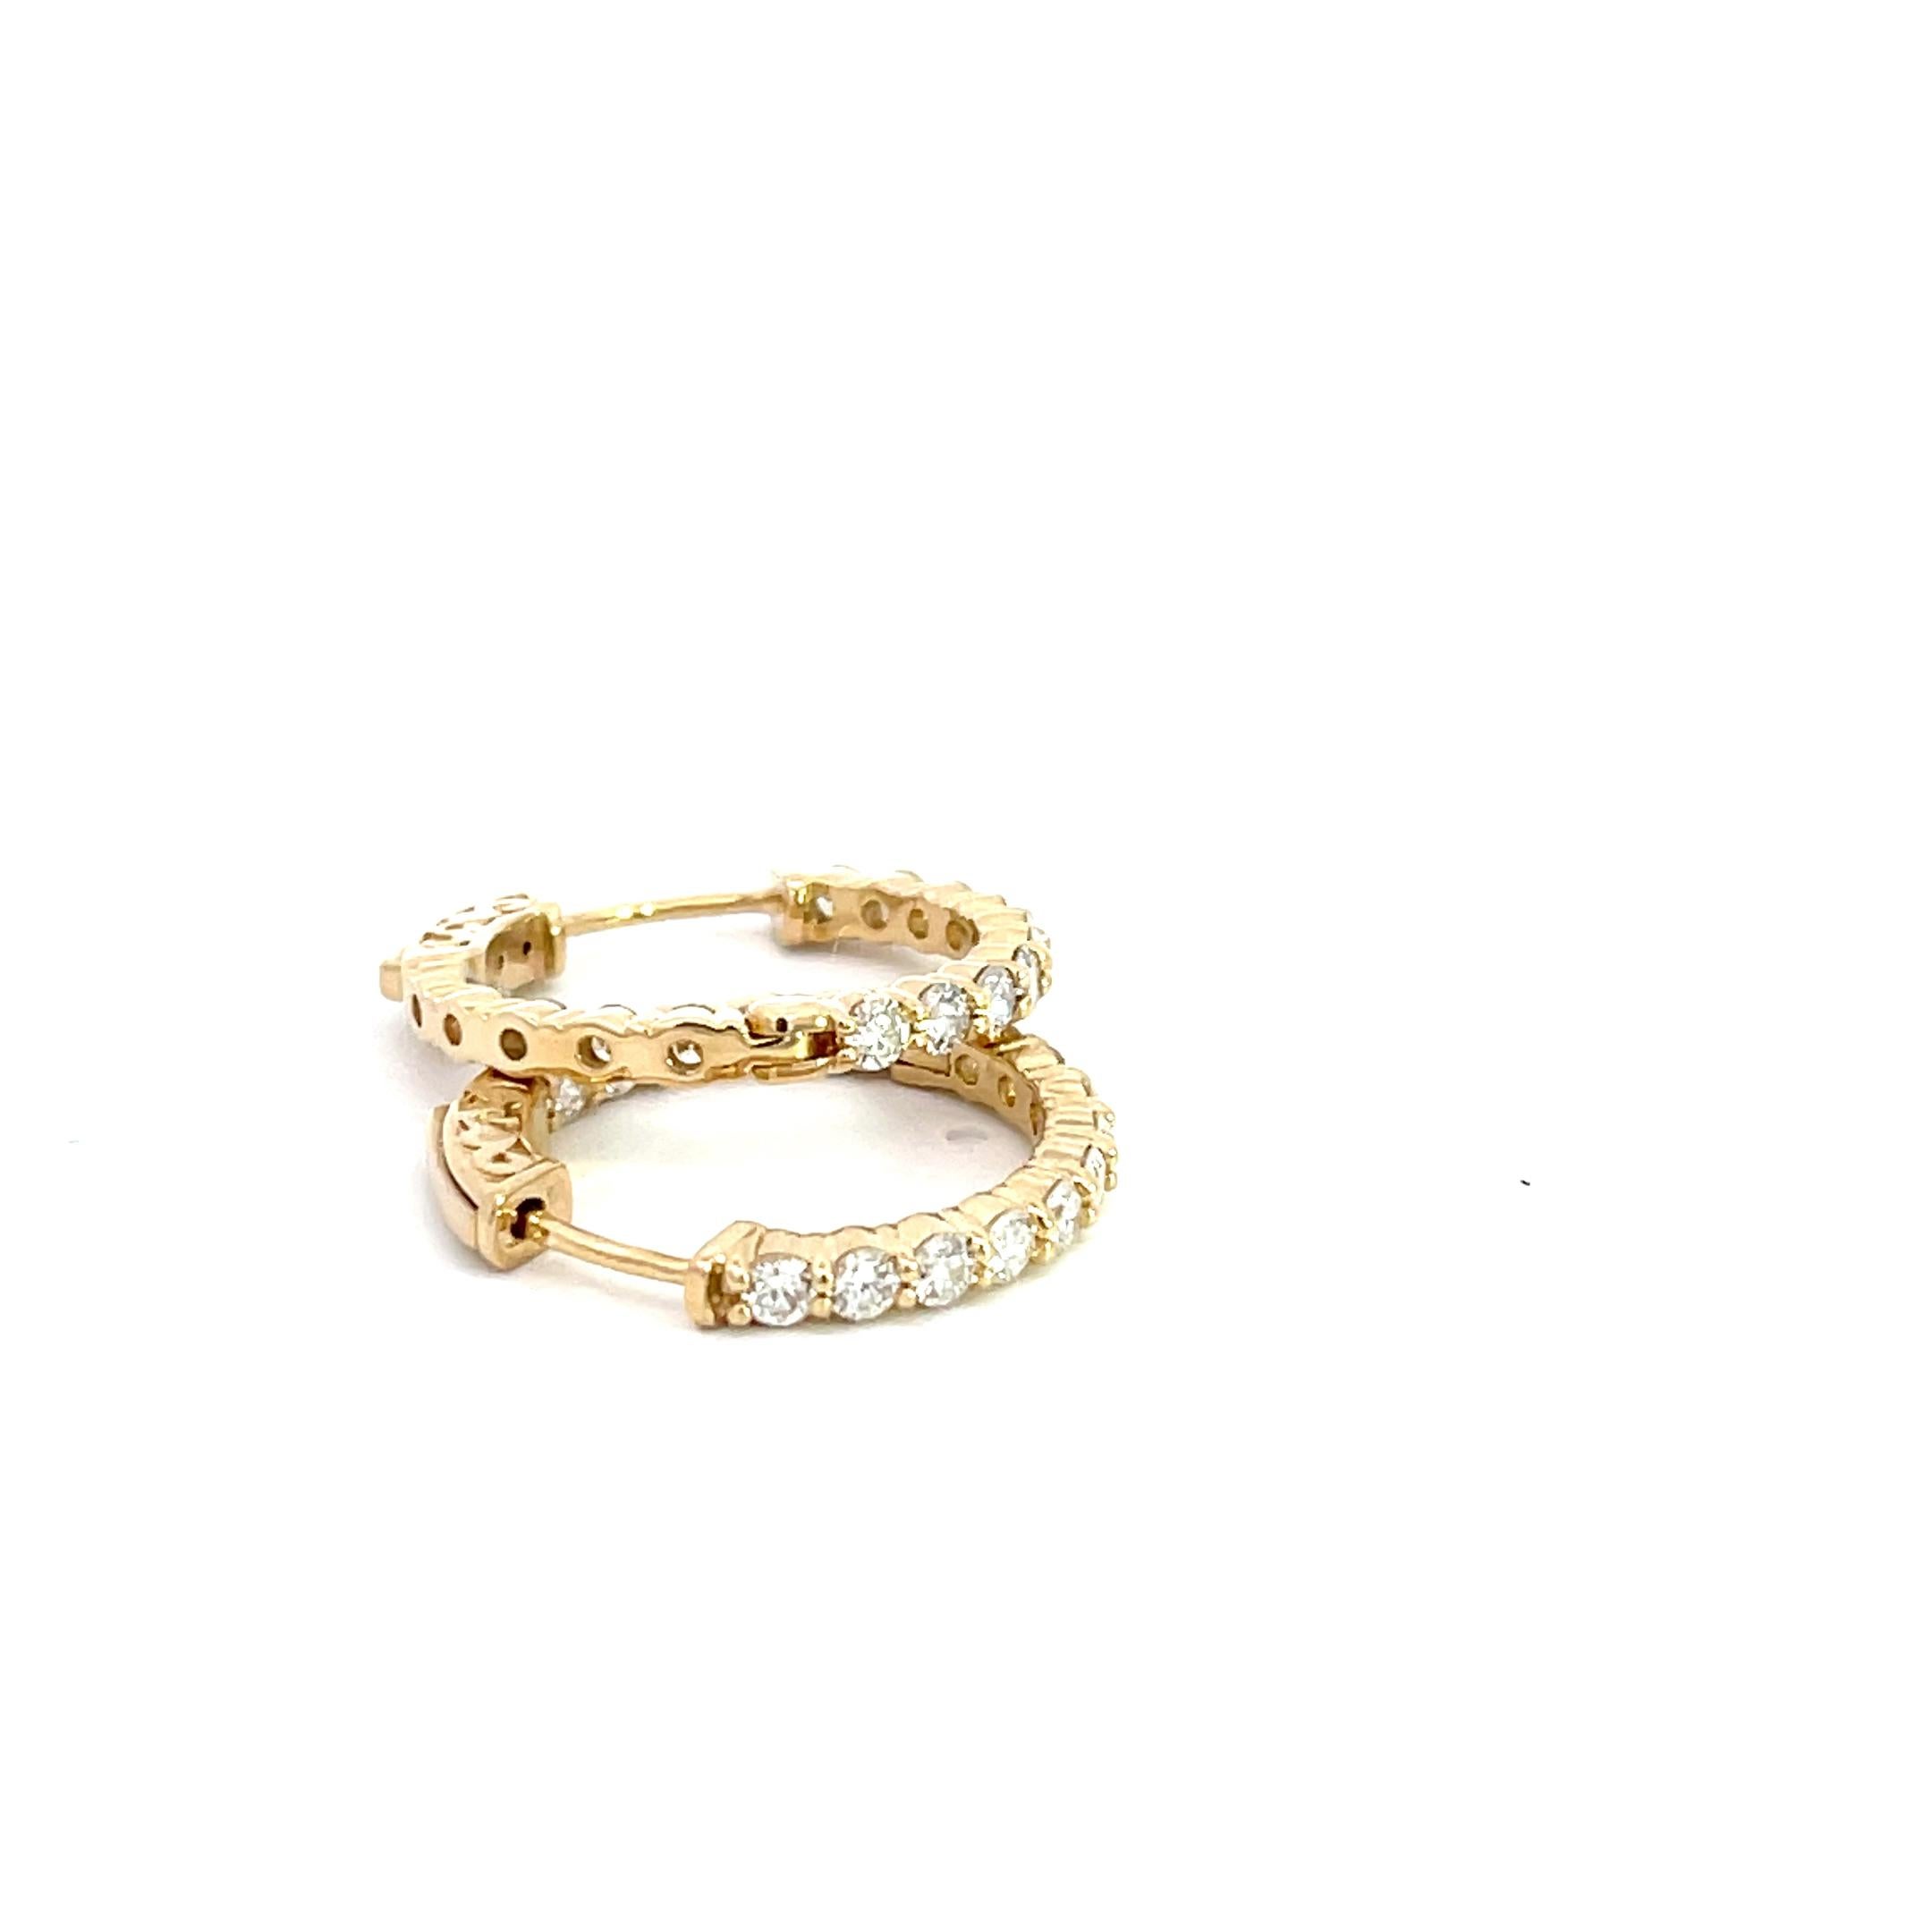 Introducing our exquisite 14K Yellow Gold 1.63ctw Diamond In and Out Hoop Earrings, a dazzling addition to your jewelry collection. Crafted with utmost precision, these hoops exude elegance and sophistication. Made from lustrous 14K yellow gold,